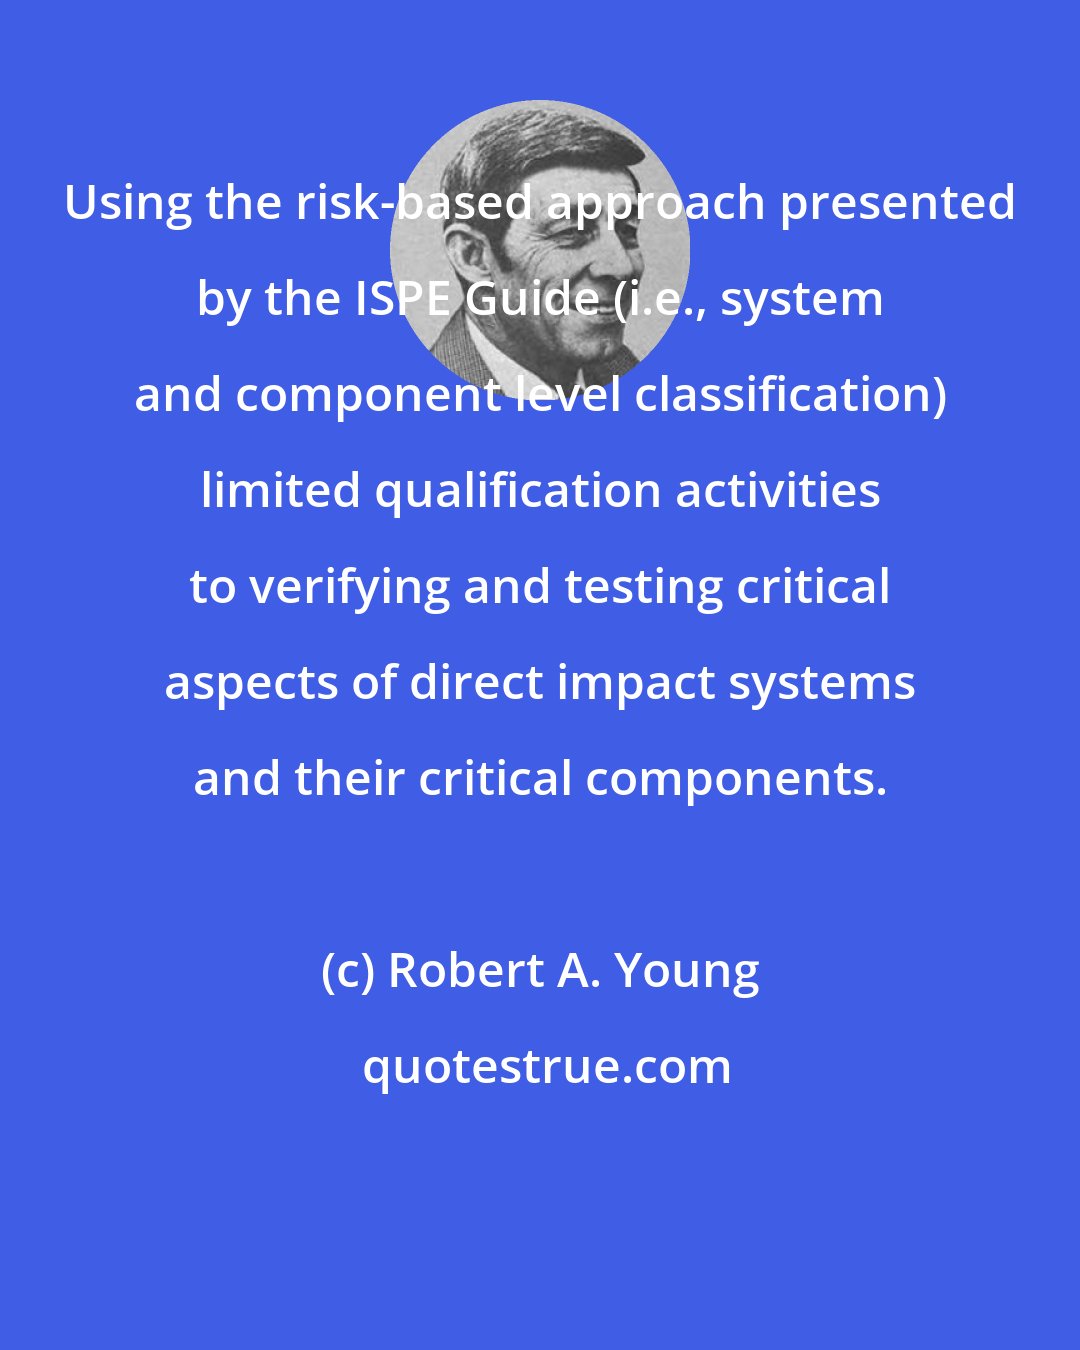 Robert A. Young: Using the risk-based approach presented by the ISPE Guide (i.e., system and component level classification) limited qualification activities to verifying and testing critical aspects of direct impact systems and their critical components.